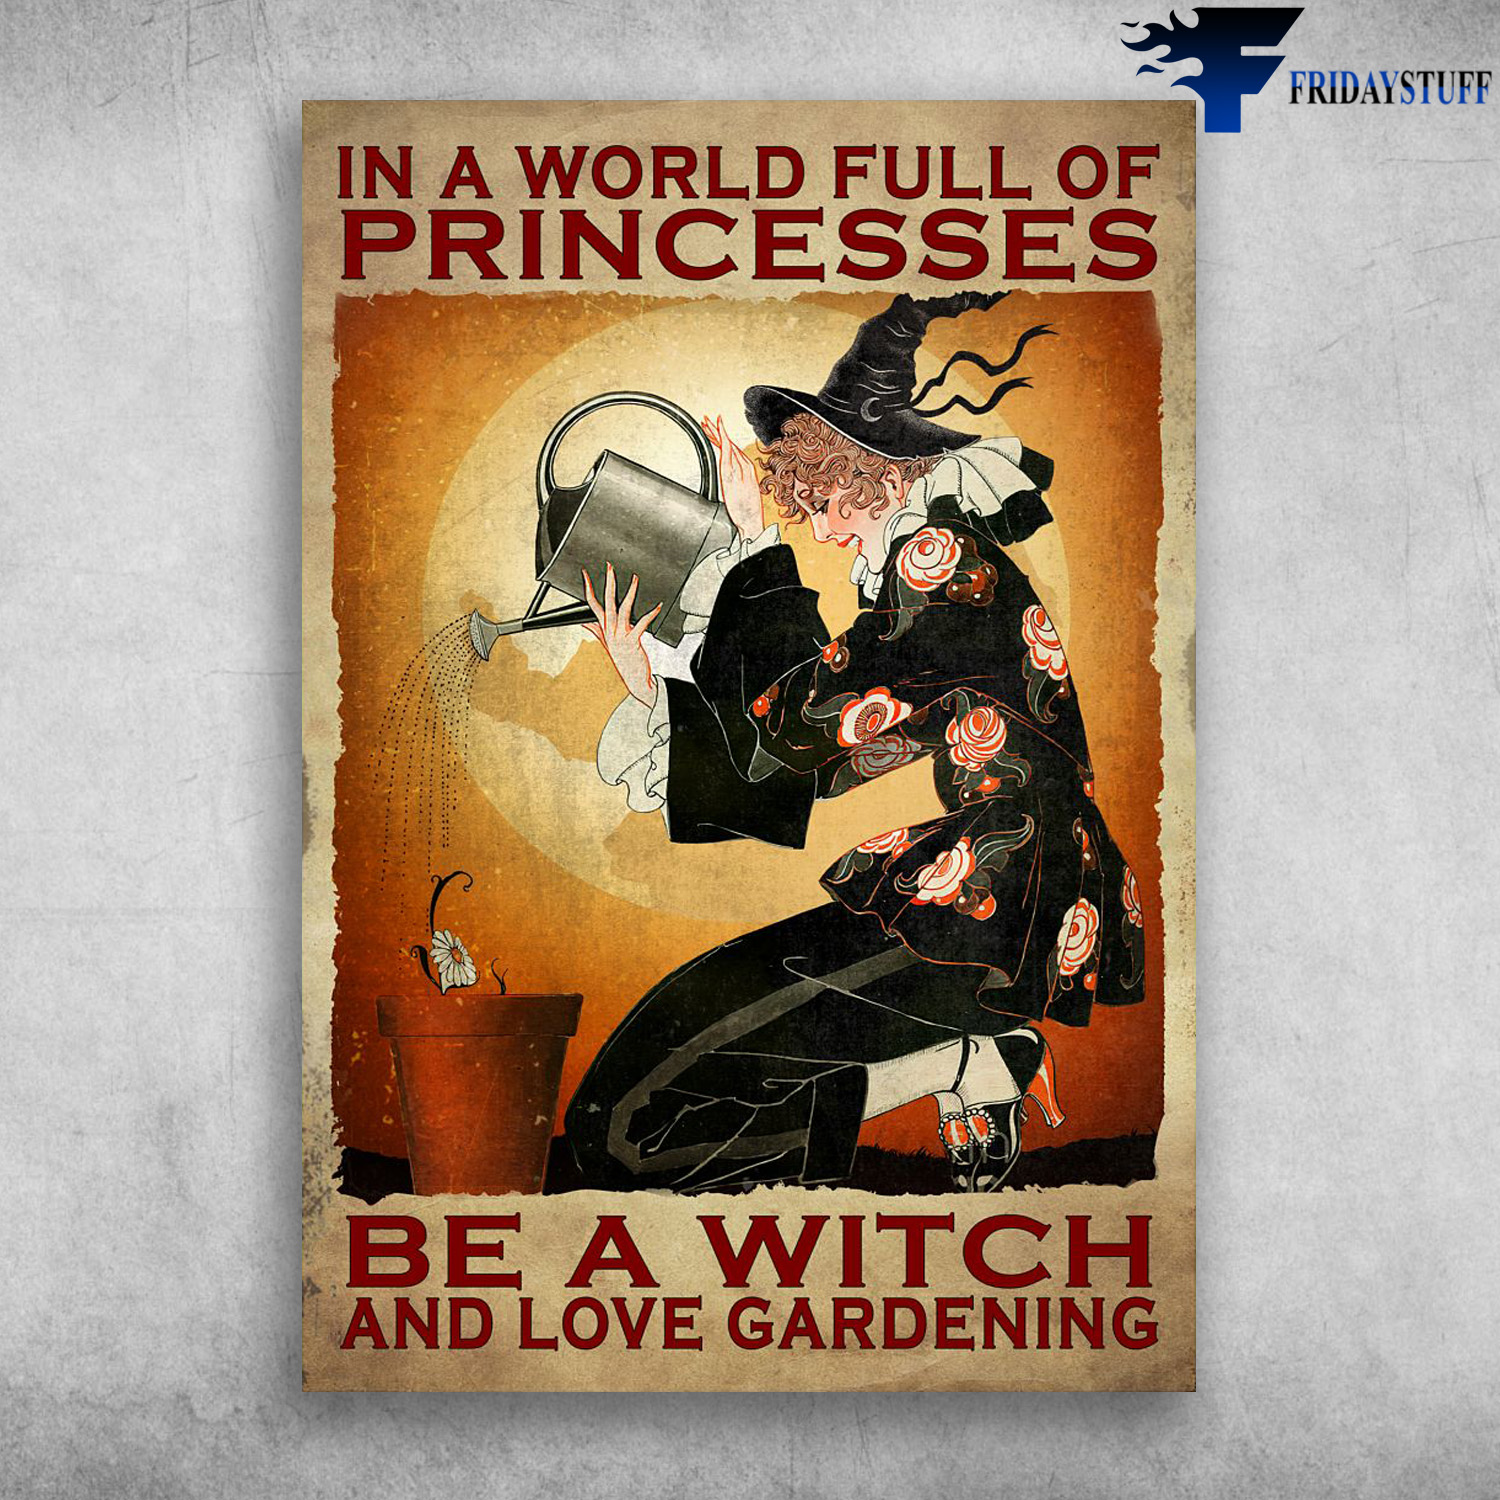 Gardening Witch - In A World Full Of Princesses, Be A Witch, And Love Gardening